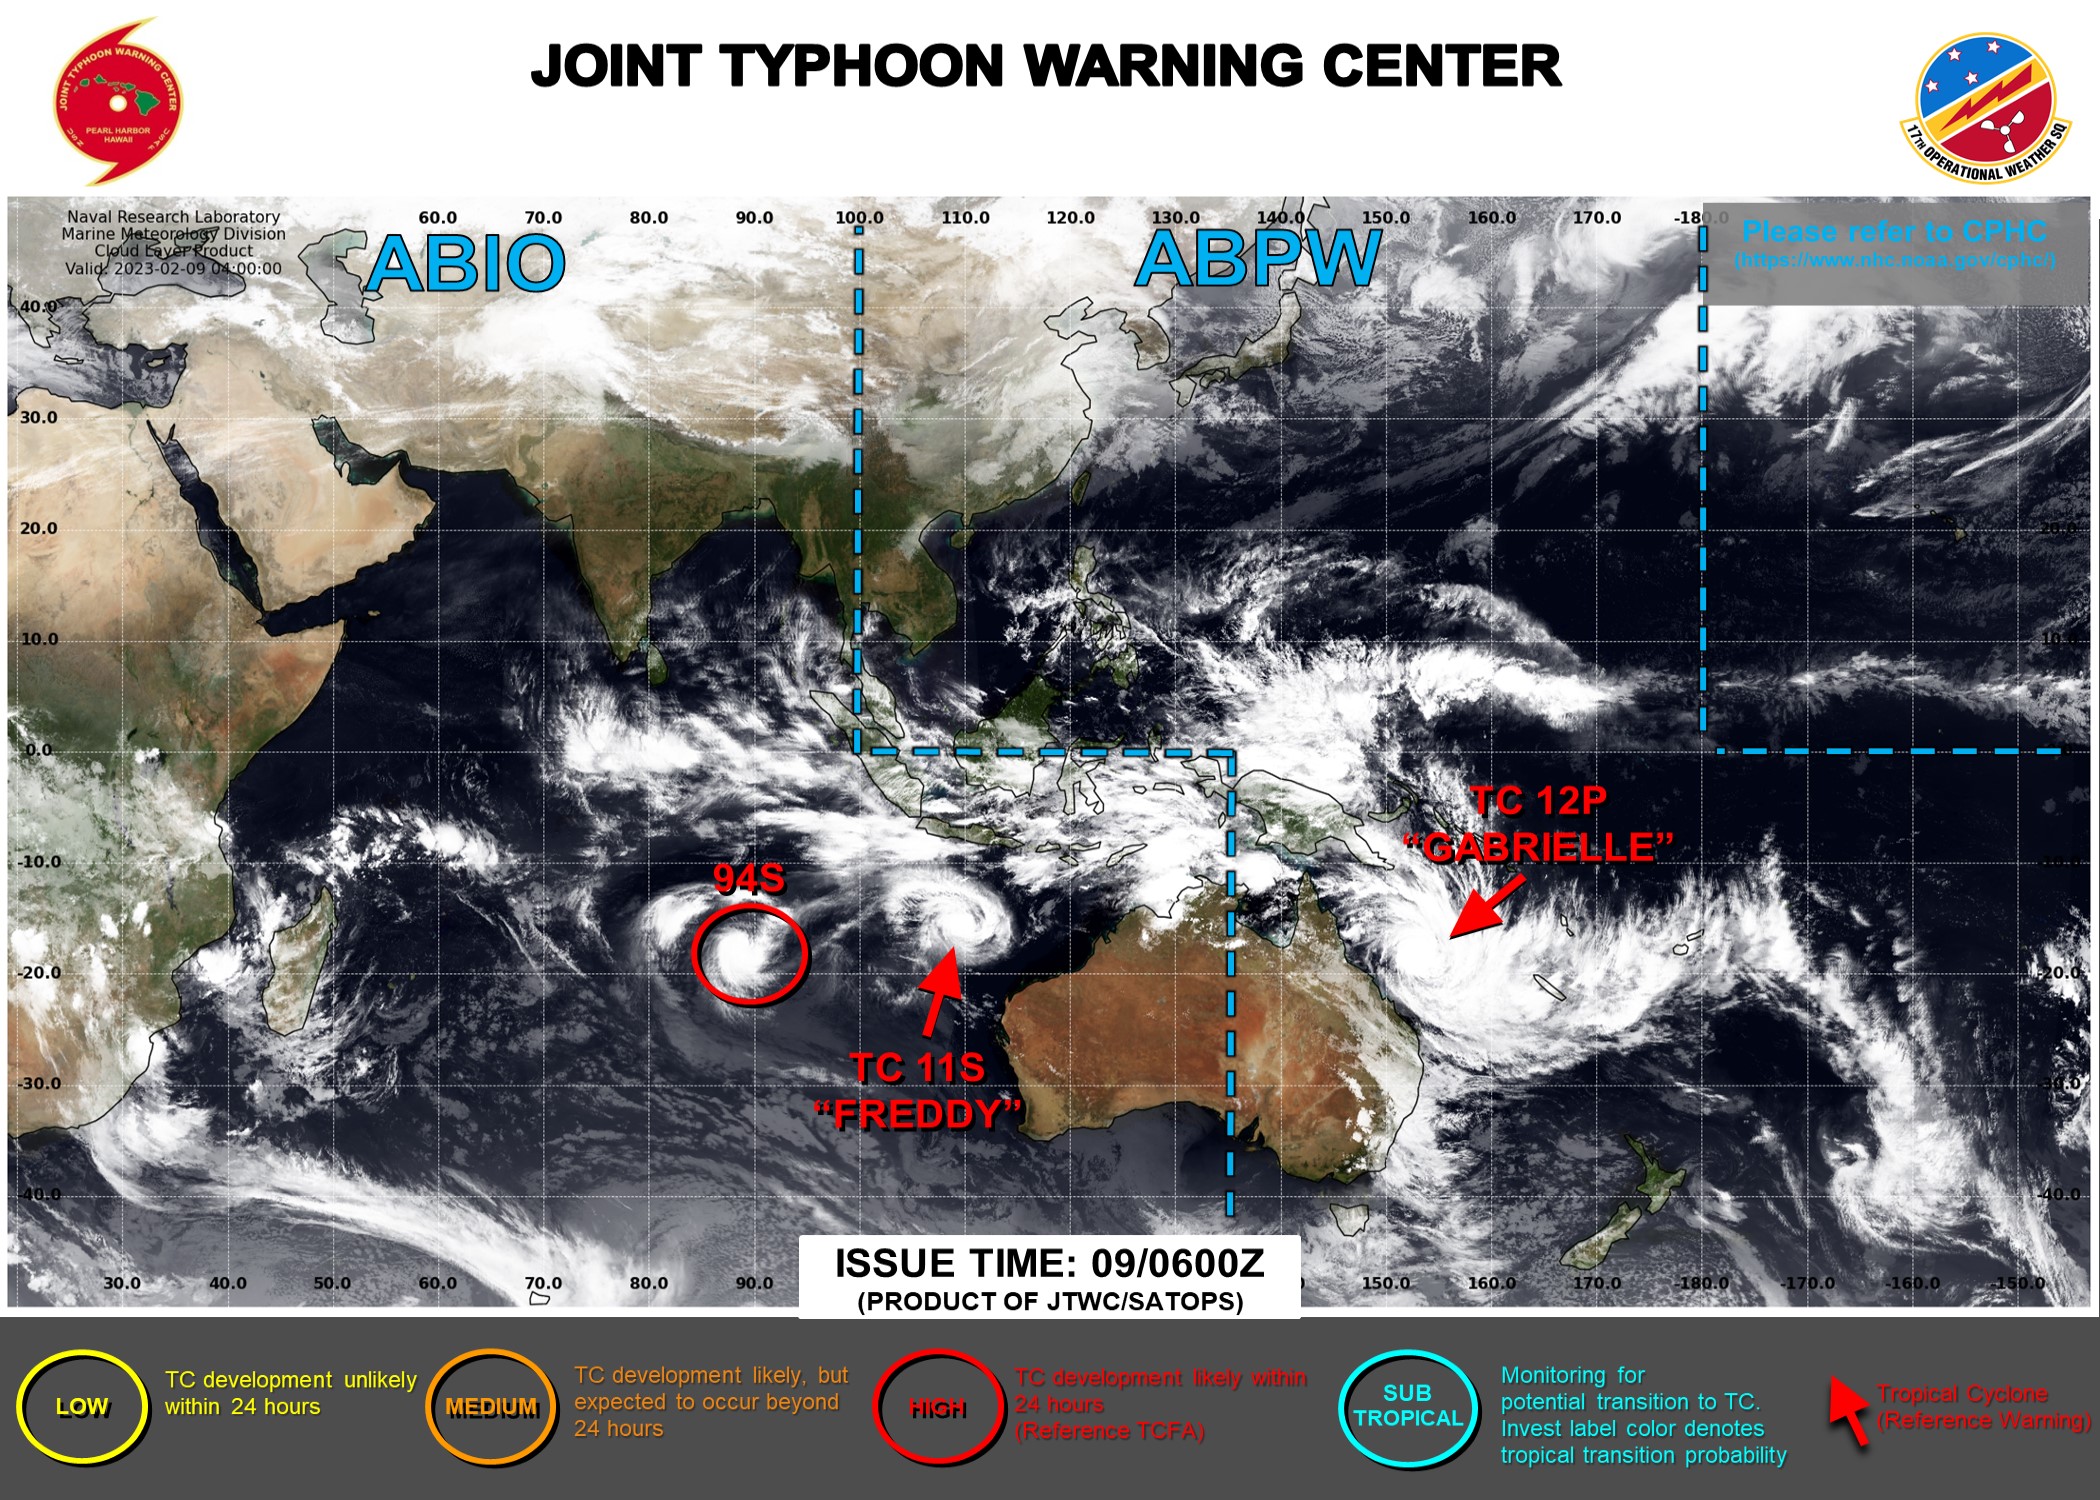 JTWC IS ISSUING 6HOURLY WARNINGS ON TC 11S(FREDDY) AND TC 12P(GABRIELLE). 3HOURLY SATELLITE BULLETINS ARE ISSUED ON TC 11S, TC 12P AND INVEST 94S.